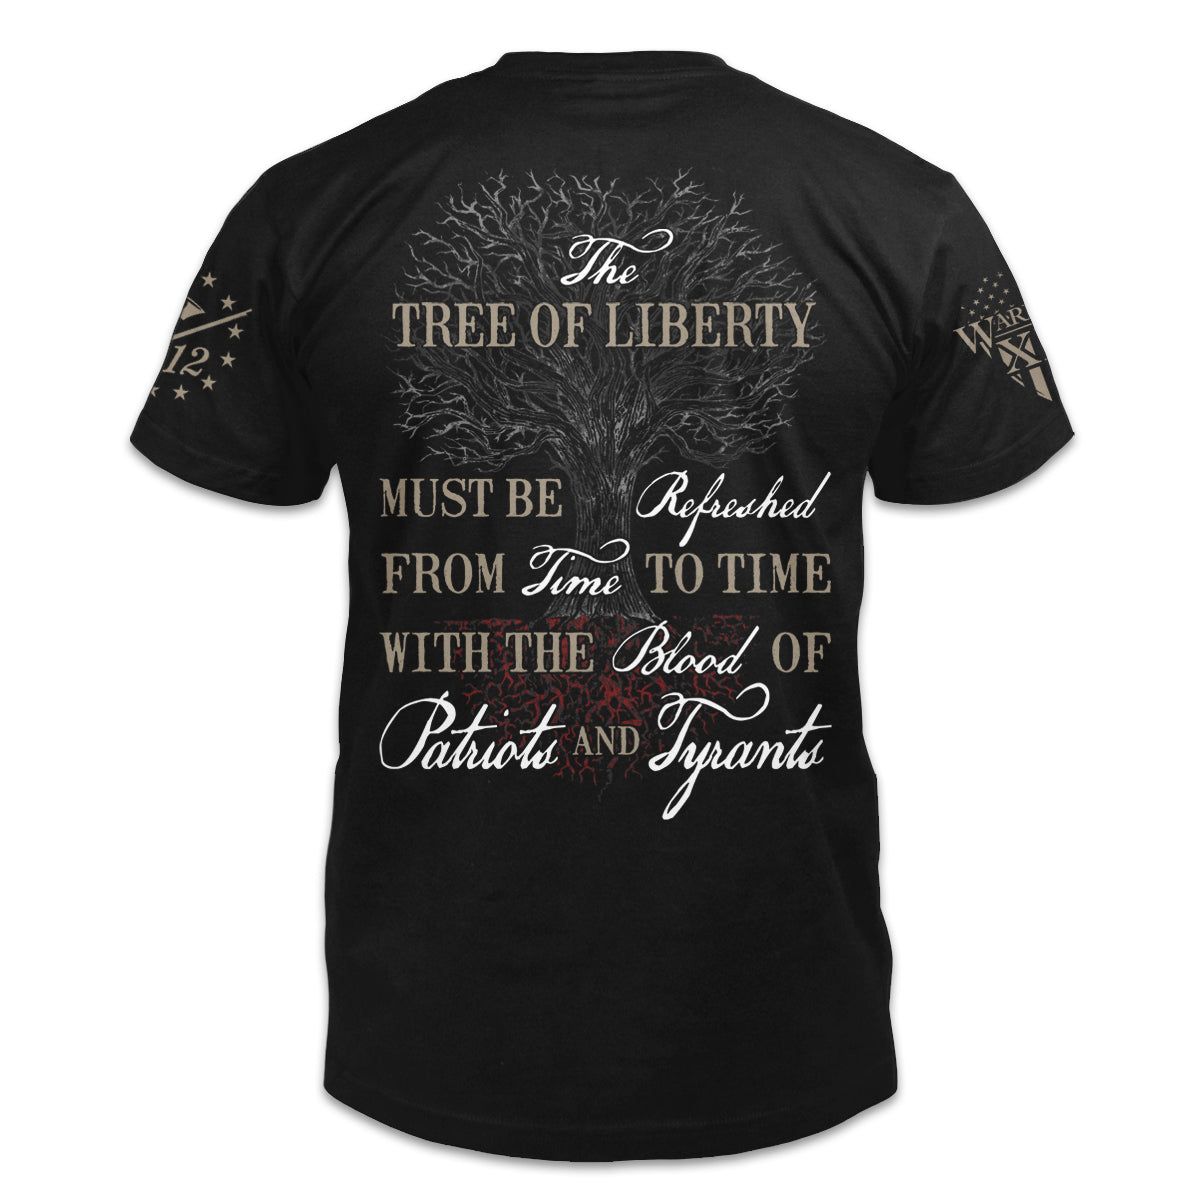 A black t-shirt with the words "The tree of liberty must be refreshed from time to time with the blood of patriots and tyrants" and a tree printed on the back of the  shirt.